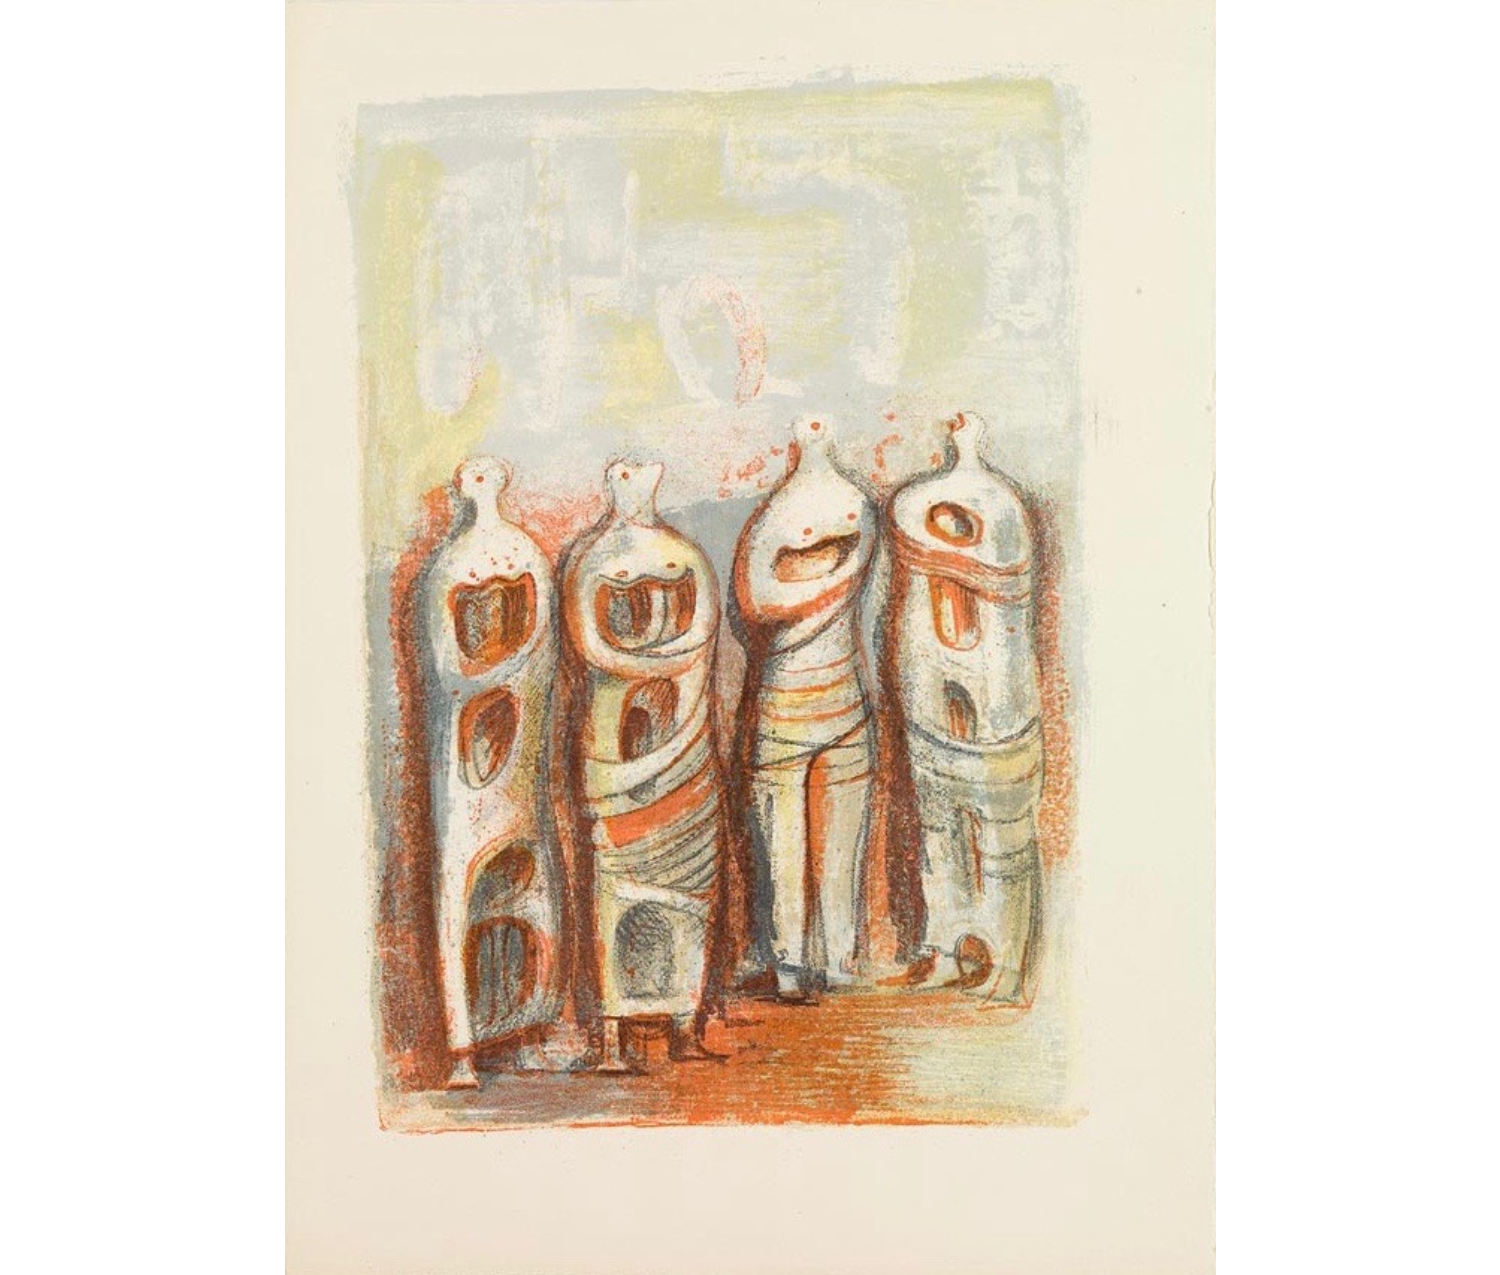 Four abstracted figures; they appear to be wrapped and have holes in their bodies; the figures are sea-foam green and orange; the background is cloudy light green, blue, and yellow.